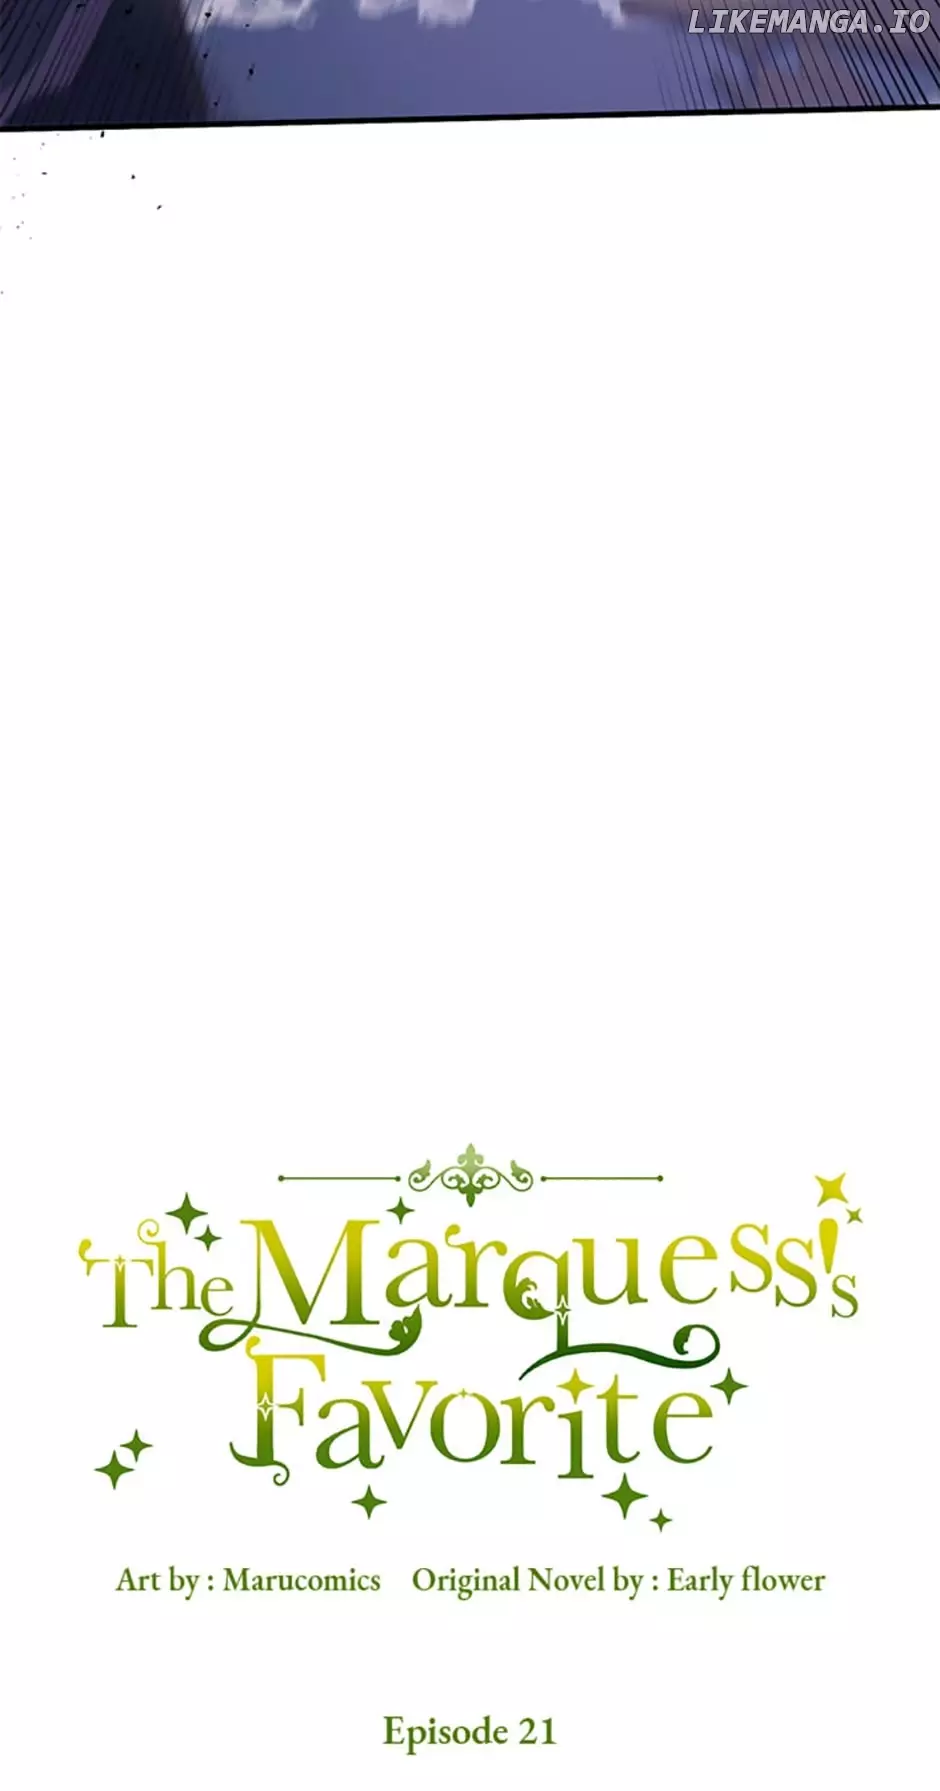 The Marquis Is Only Kind To Her - 21 page 32-5045bbd4